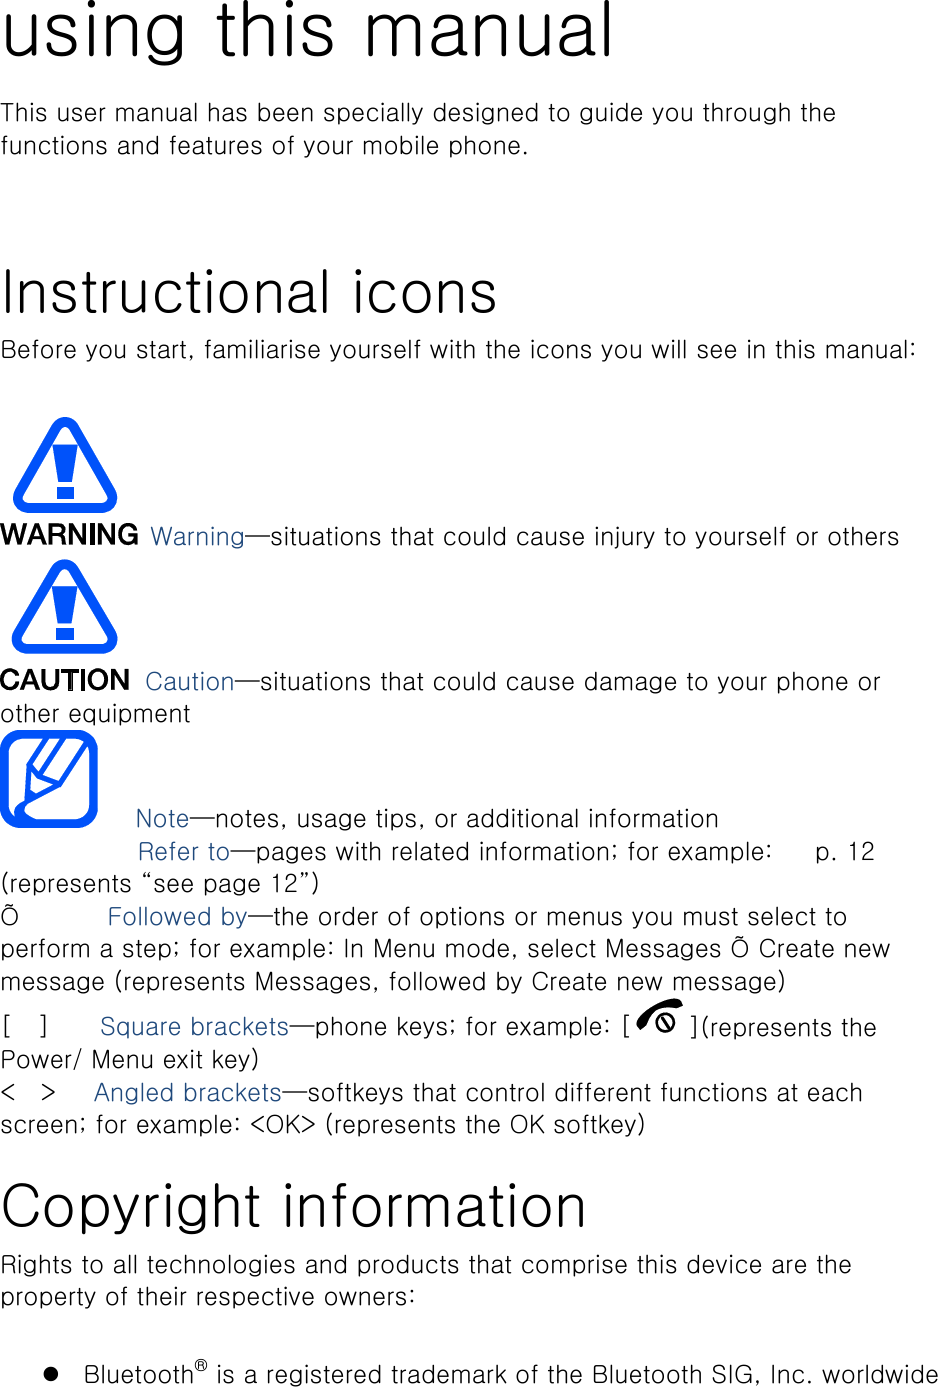 using this manual This user manual has been specially designed to guide you through the functions and features of your mobile phone.      Instructional icons Before you start, familiarise yourself with the icons you will see in this manual:     Warning—situations that could cause injury to yourself or others  Caution—situations that could cause damage to your phone or other equipment    Note—notes, usage tips, or additional information   　       Refer to—pages with related information; for example: 　 p. 12 (represents “see page 12”) Õ       Followed by—the order of options or menus you must select to perform a step; for example: In Menu mode, select Messages Õ Create new message (represents Messages, followed by Create new message) [  ]    Square brackets—phone keys; for example: [ ](represents the Power/ Menu exit key) &lt;  &gt;   Angled brackets—softkeys that control different functions at each screen; for example: &lt;OK&gt; (represents the OK softkey)  Copyright information Rights to all technologies and products that comprise this device are the property of their respective owners:   Bluetooth® is a registered trademark of the Bluetooth SIG, Inc. worldwide 